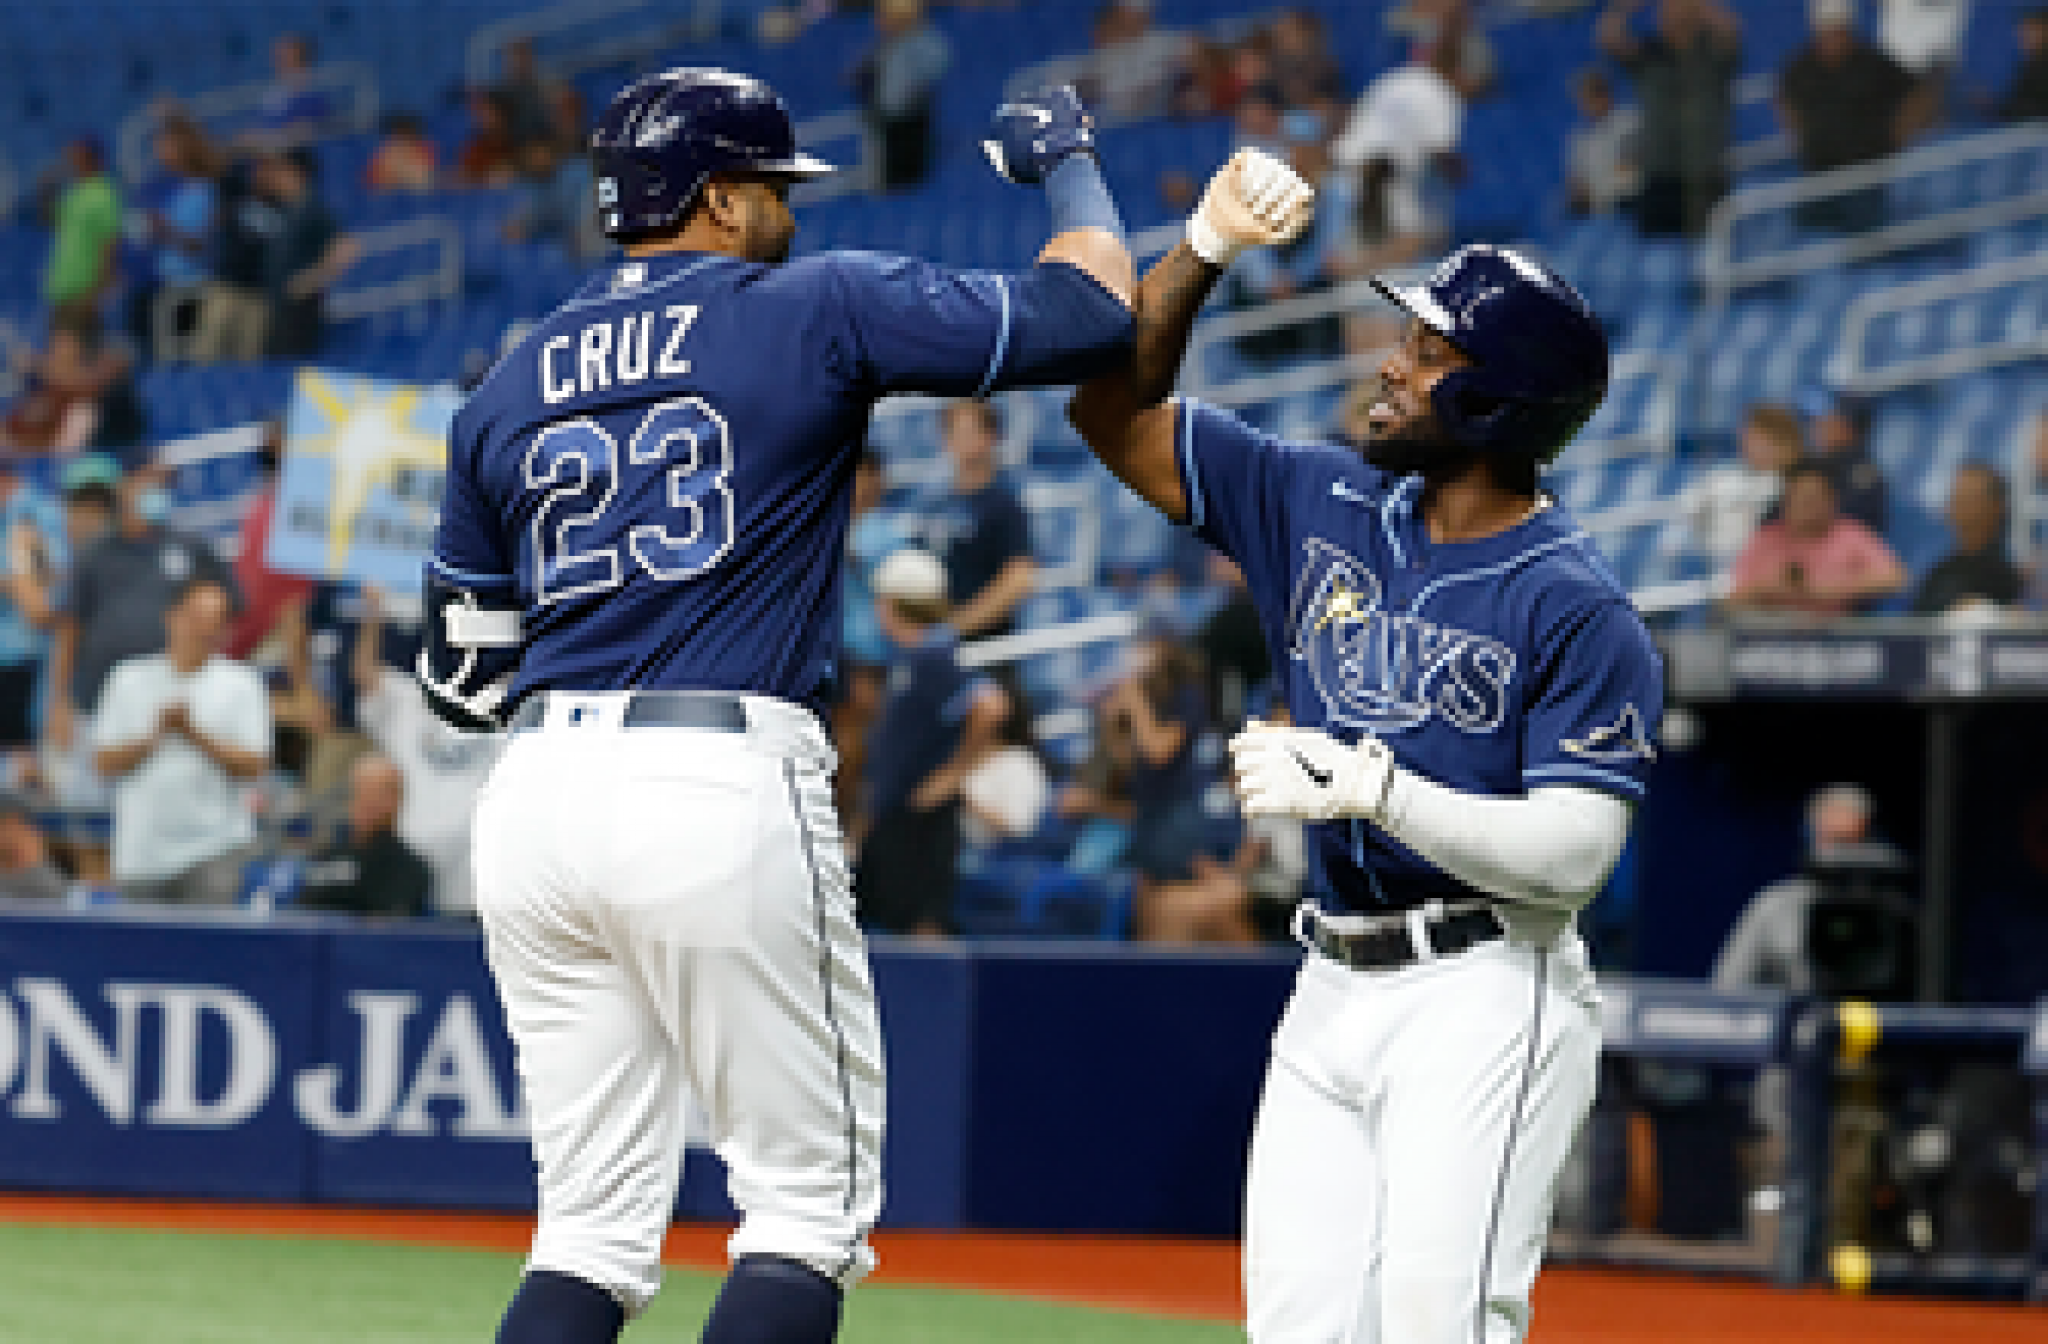 Nelson Cruz cranks two homers, drives in five runs in Rays’ 10-0 rout of Orioles